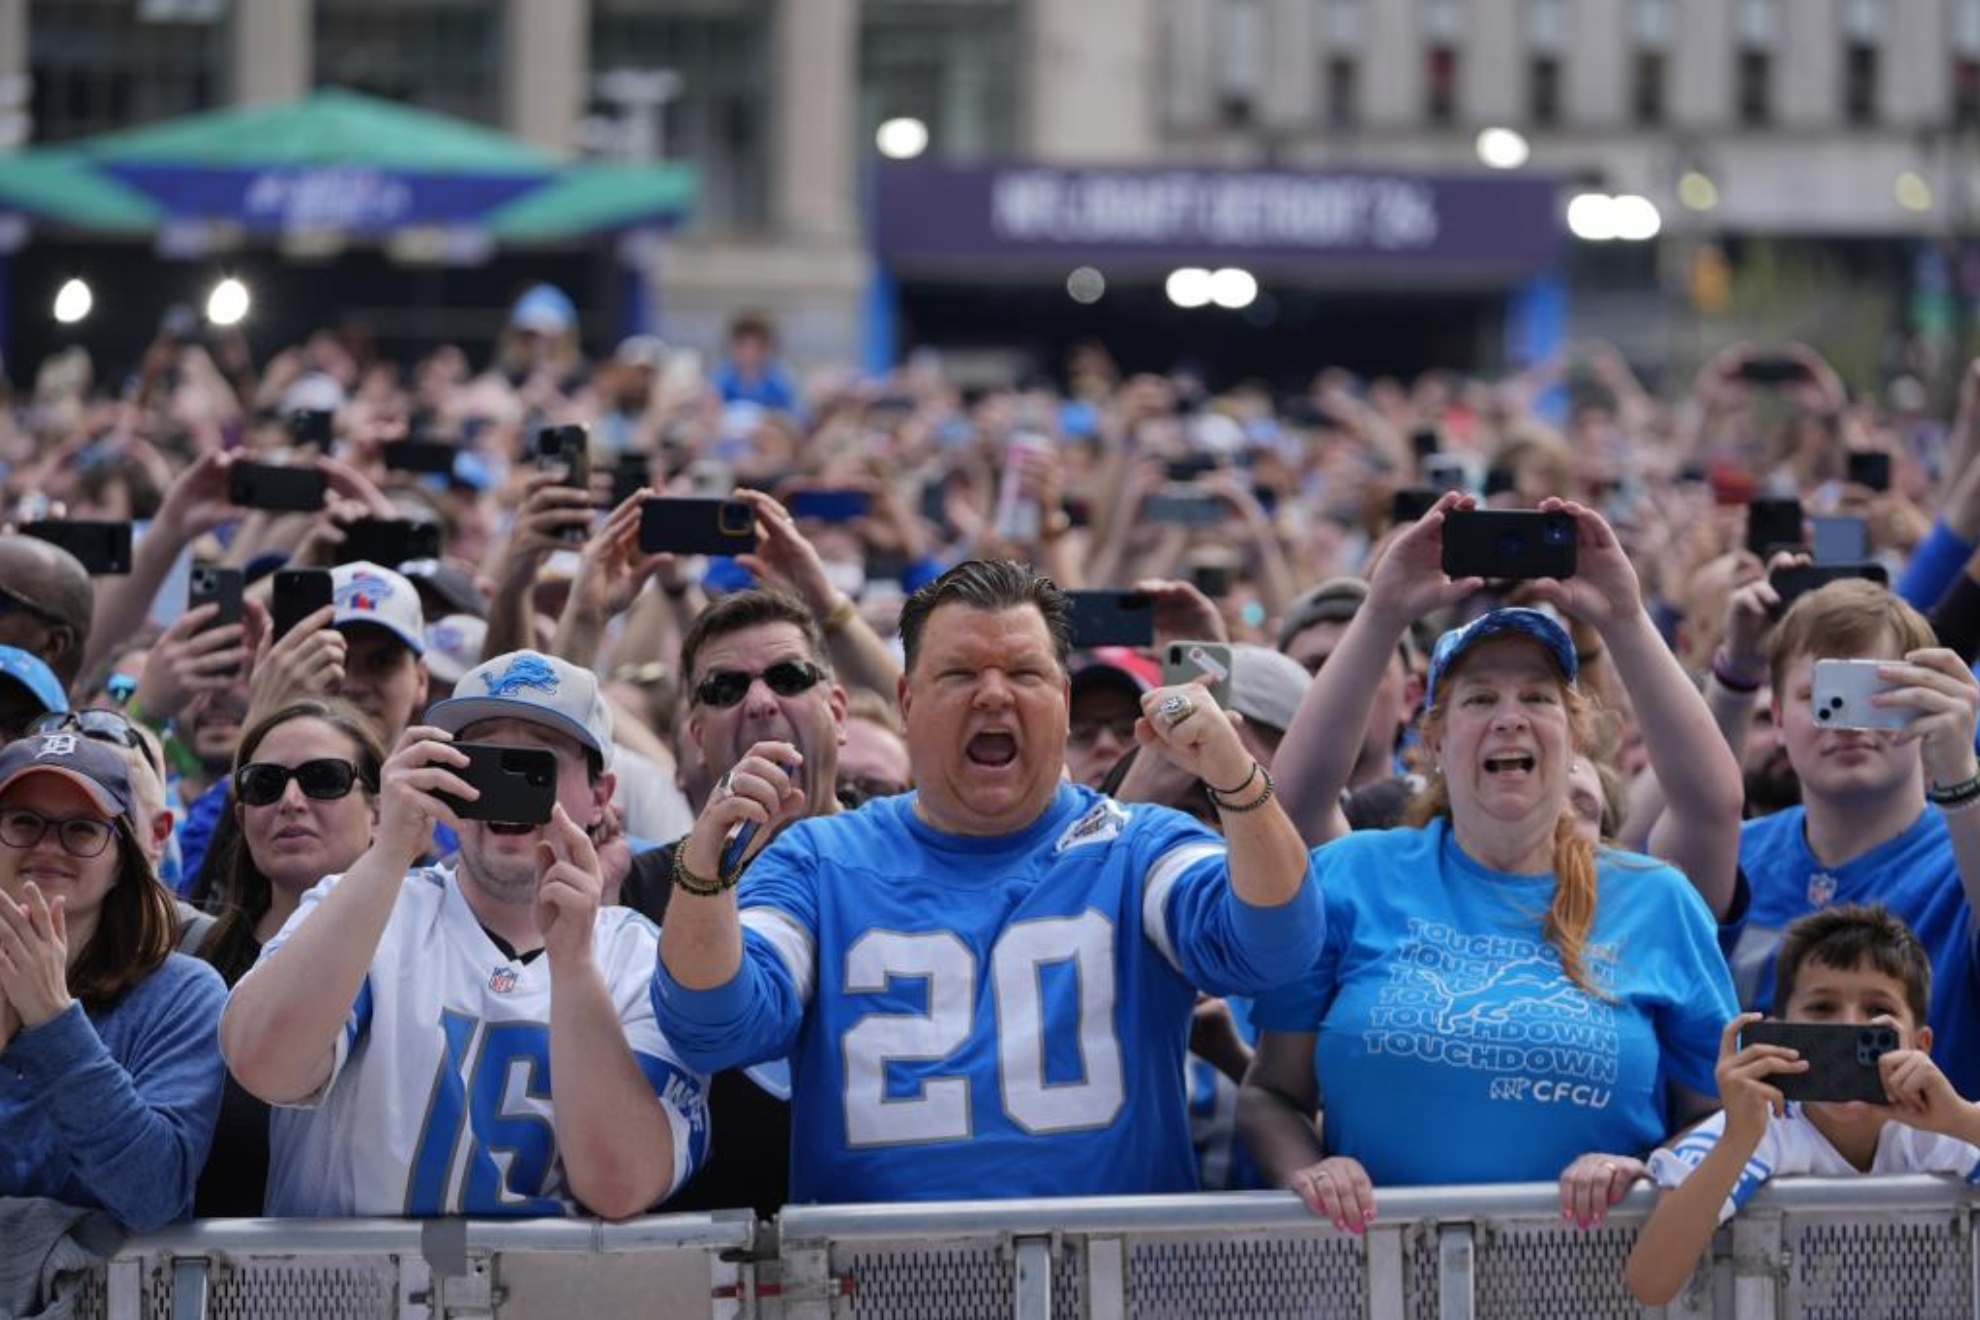 Detroit NFL Draft breaks attendance record with 700,000 in attendance